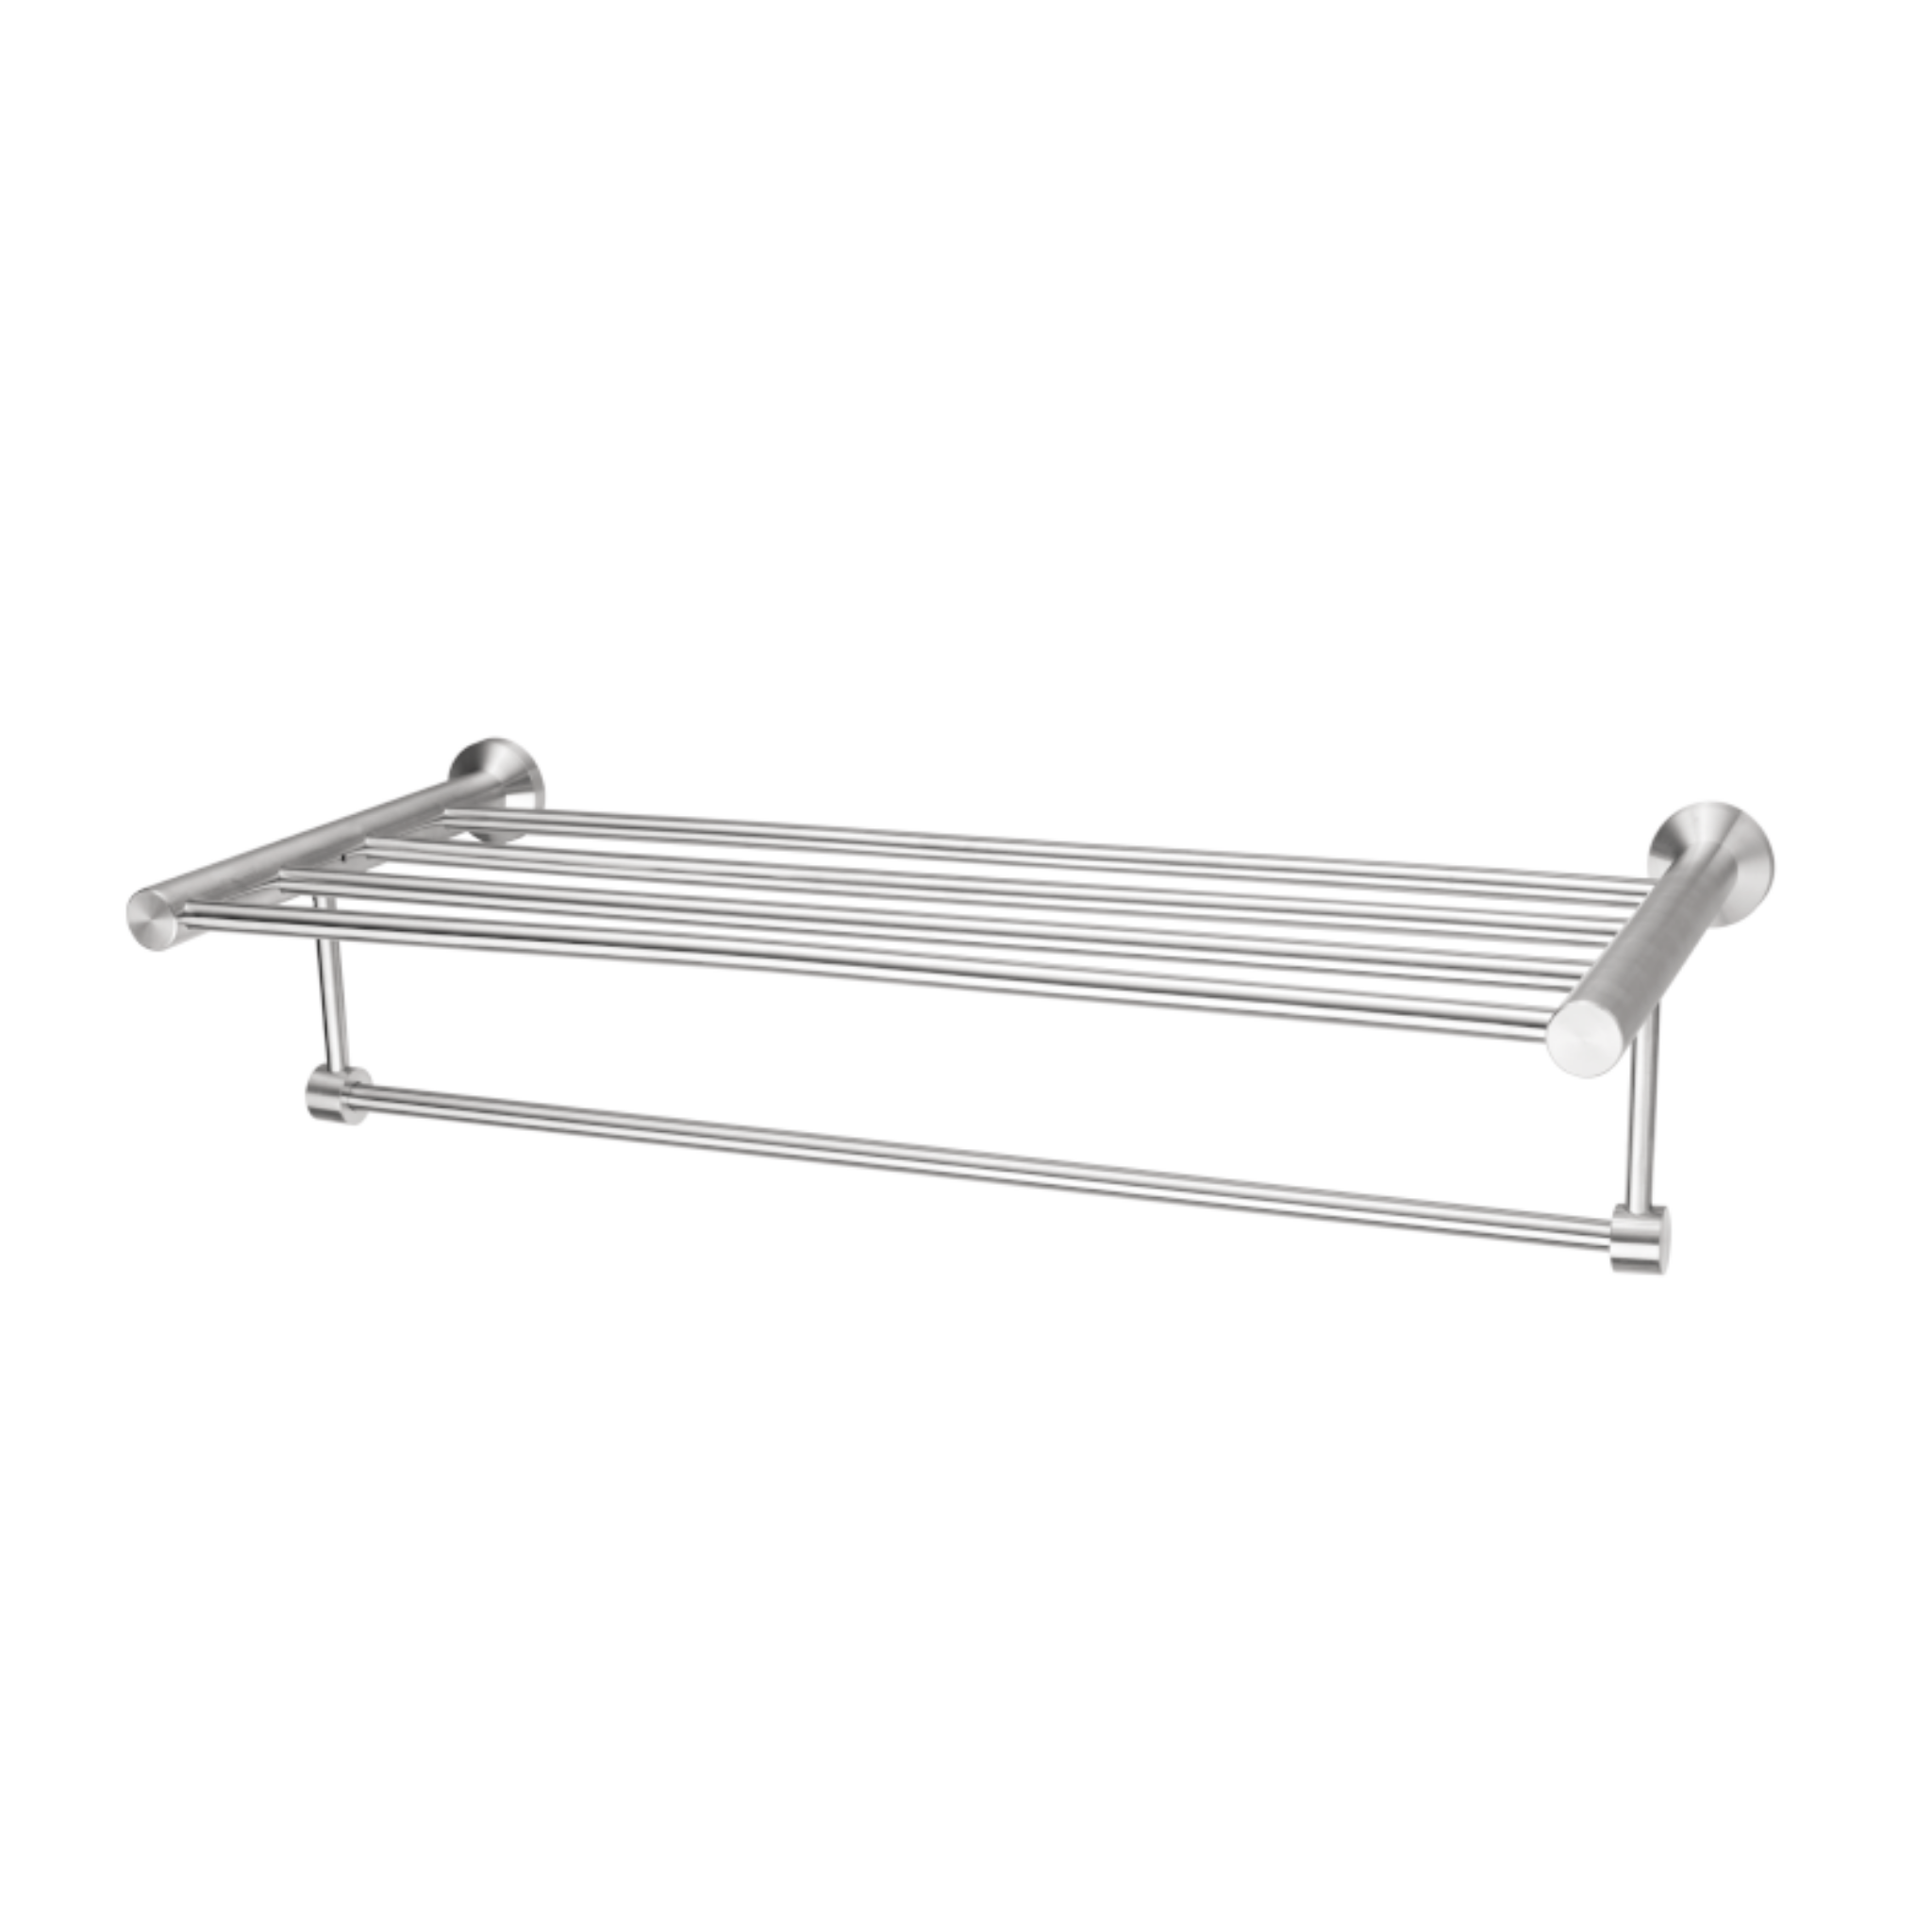 QS1504/PSS, Towel Shelf, Polished Stainless Steel, QS